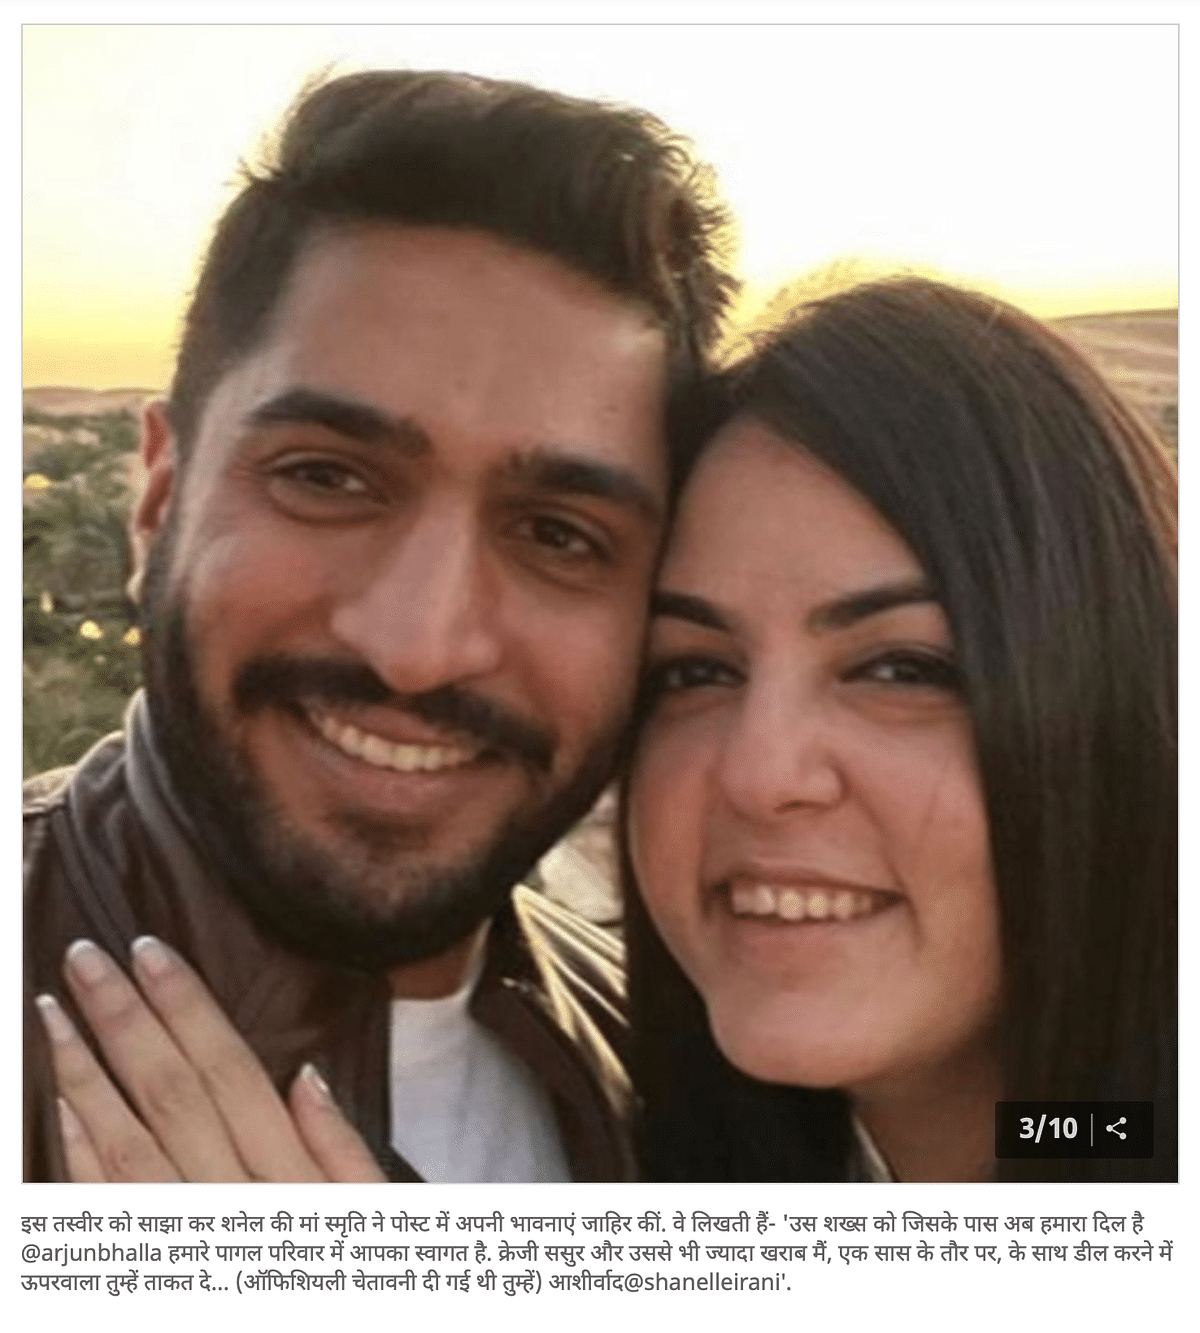 The woman getting engaged in the photo is Shanelle Irani, Smriti Irani's stepdaughter.